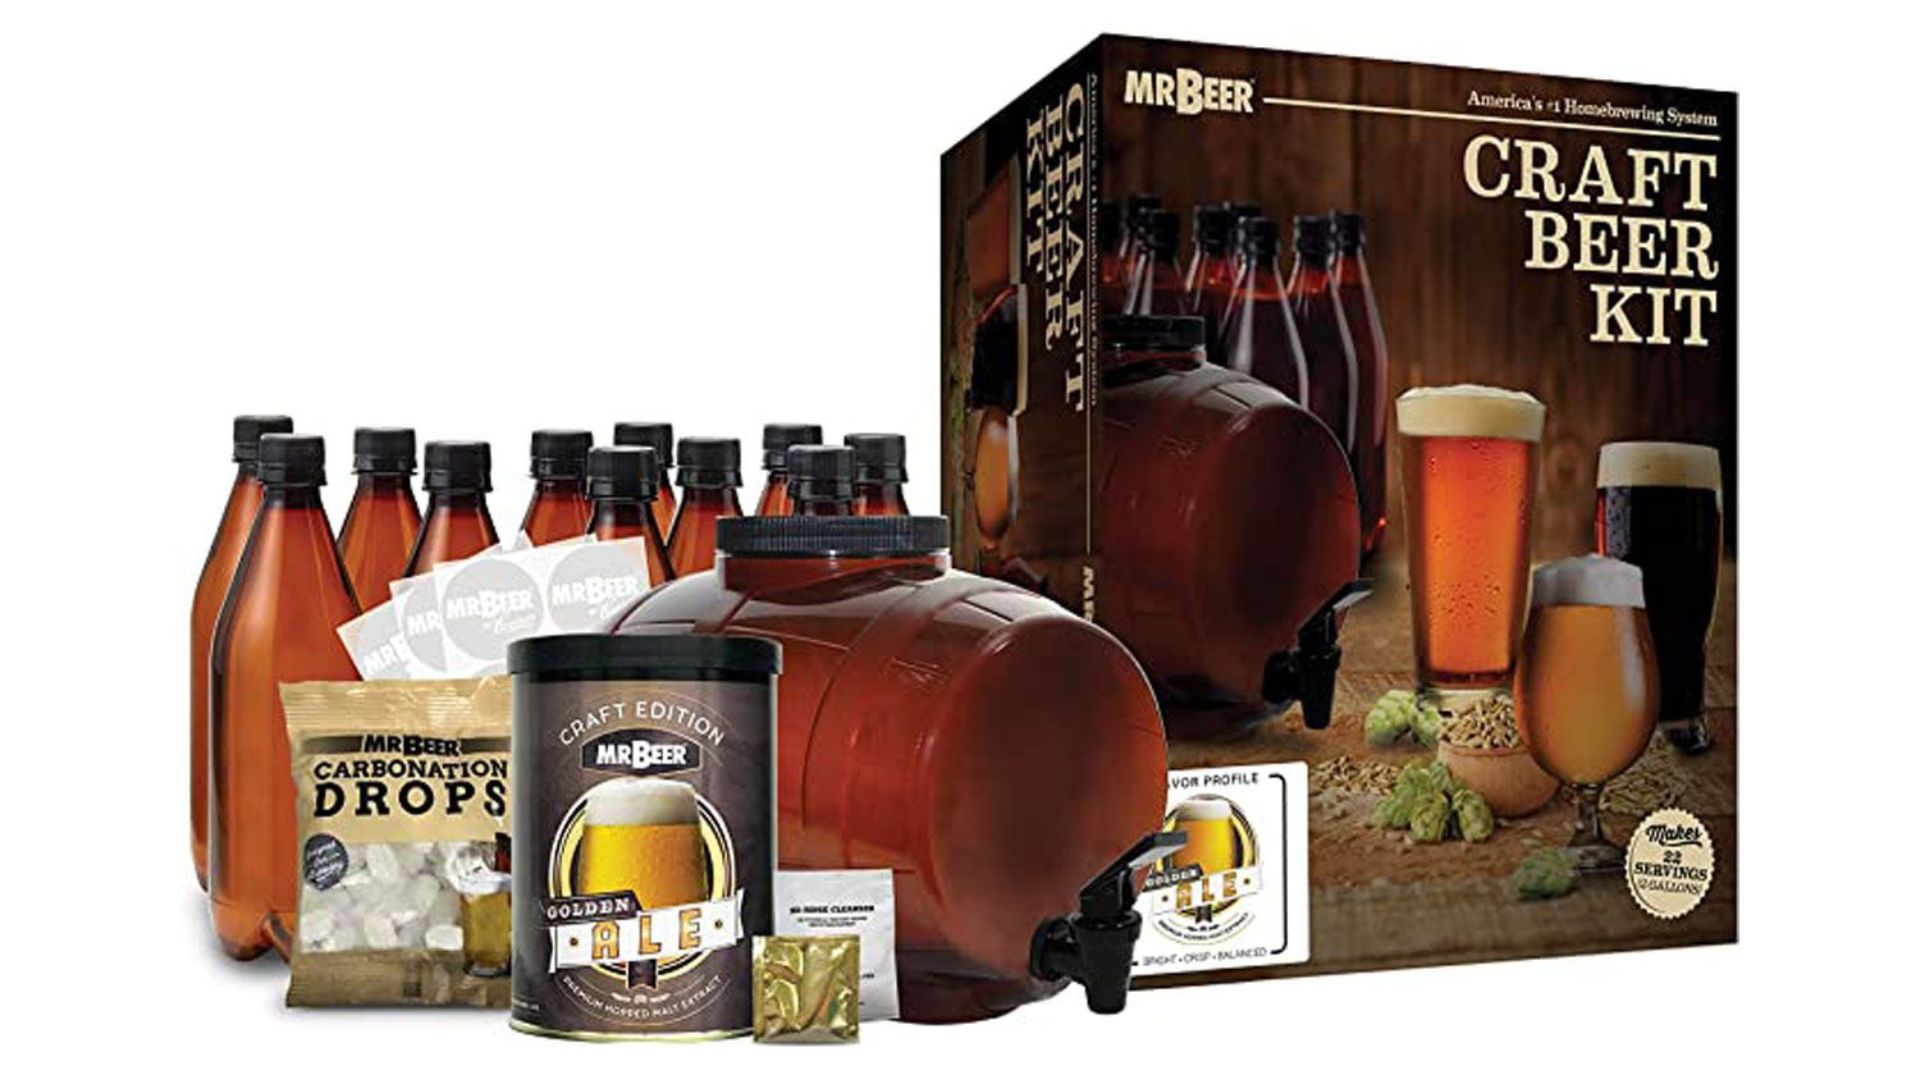 this image shows one of the Beer Brewing Kits